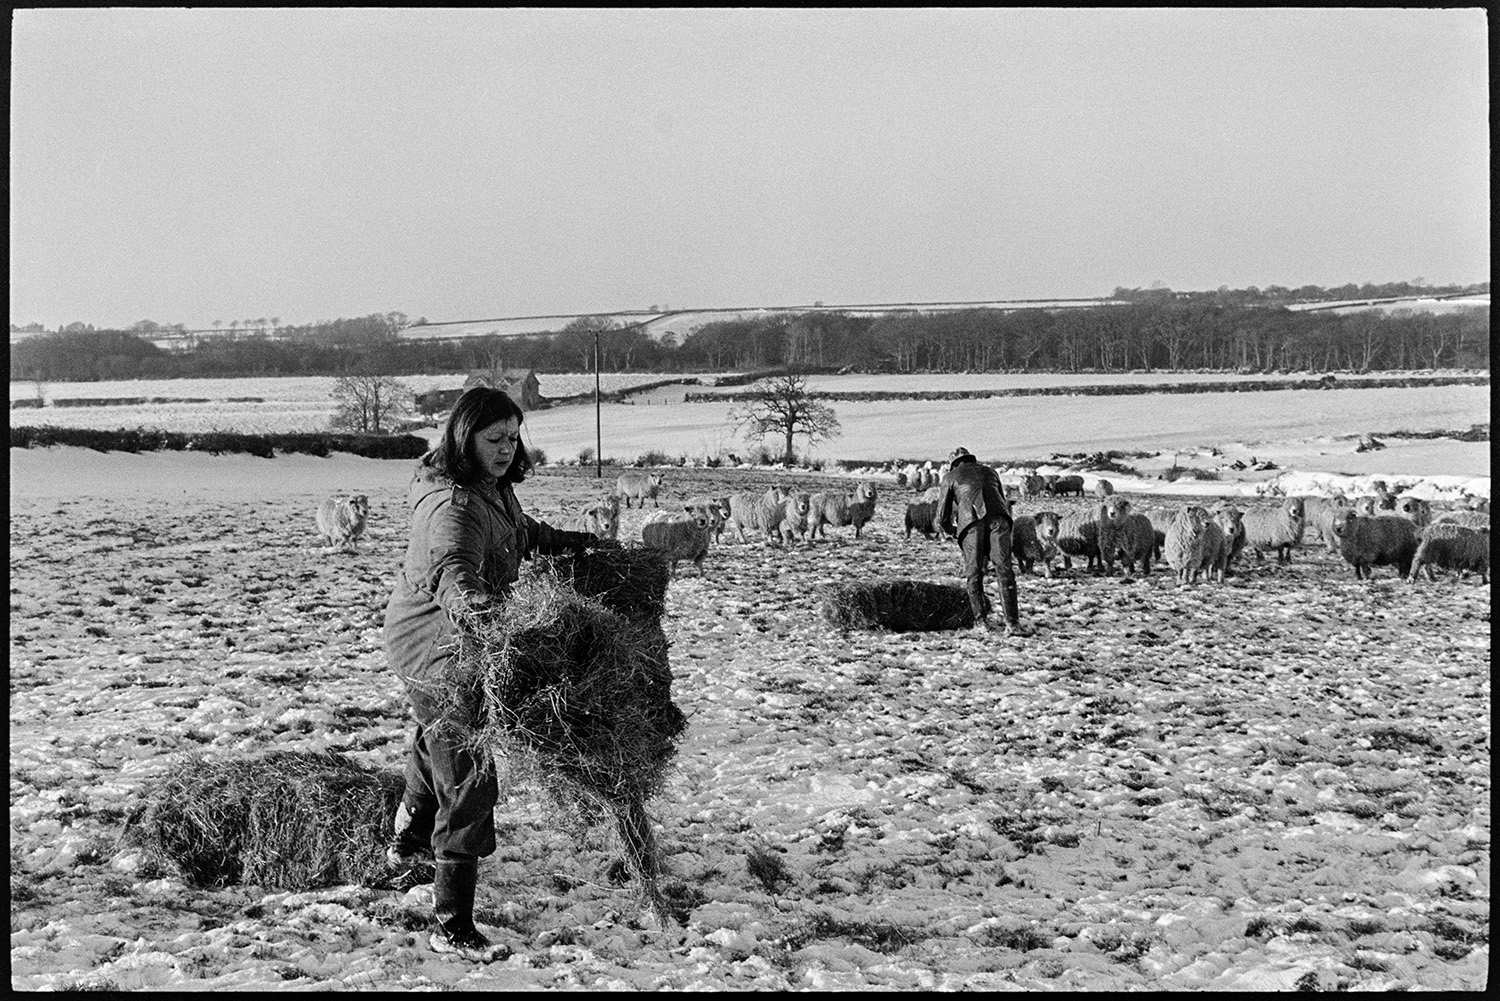 Snow, feeding cows and sheep, cows and calves. 
[A woman and man putting out hay for sheep in a snow covered field at Parsonage Farm, Iddesleigh. Fields and a wooded area can be seen in the background.]